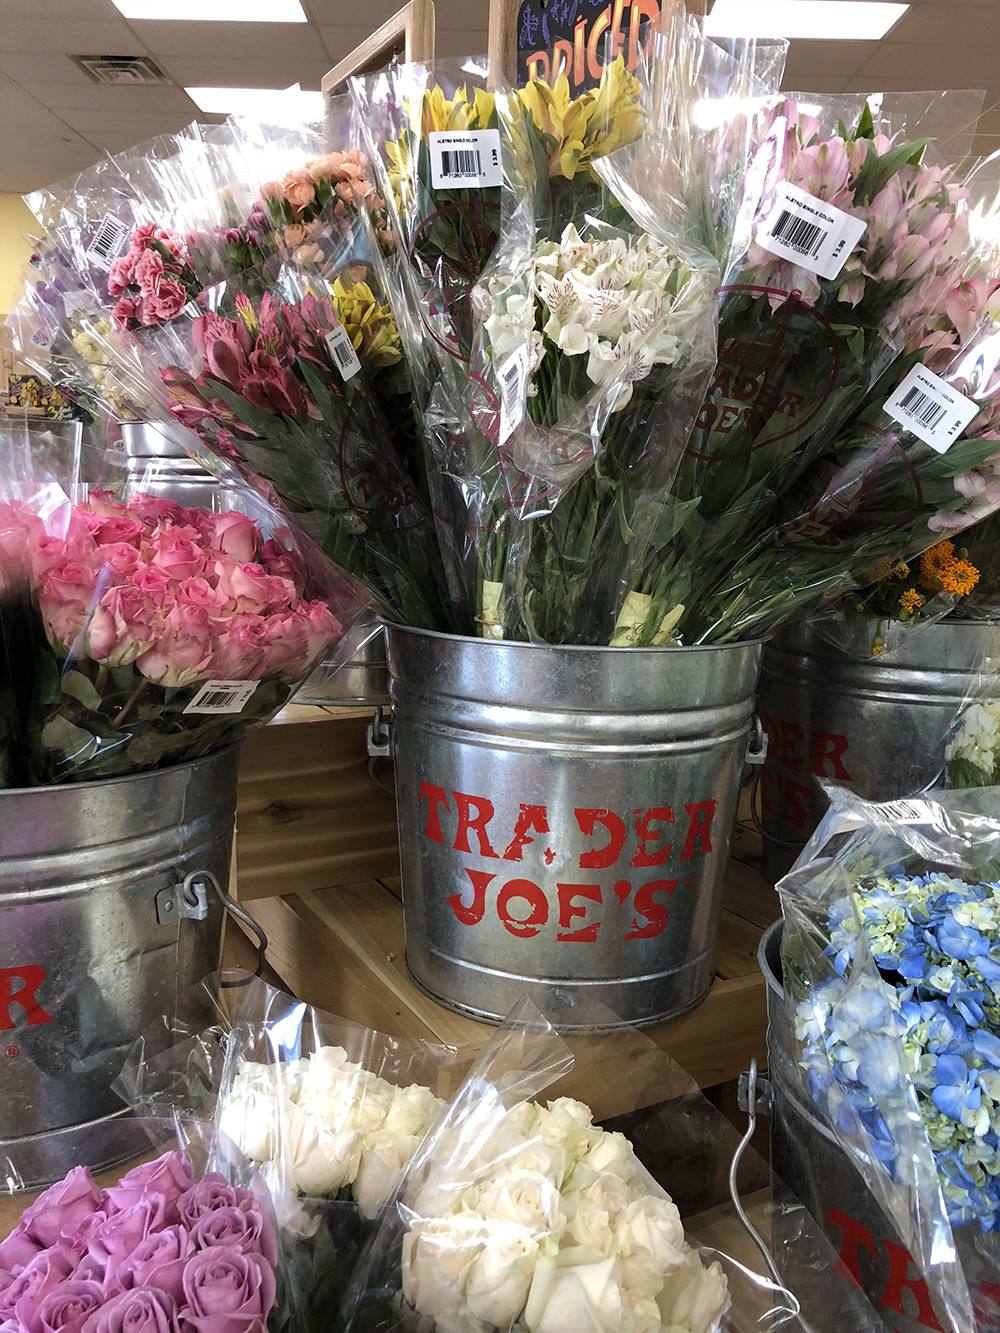 23 Of the Best Ideas for Trader Joe's Flowers Wedding Home, Family